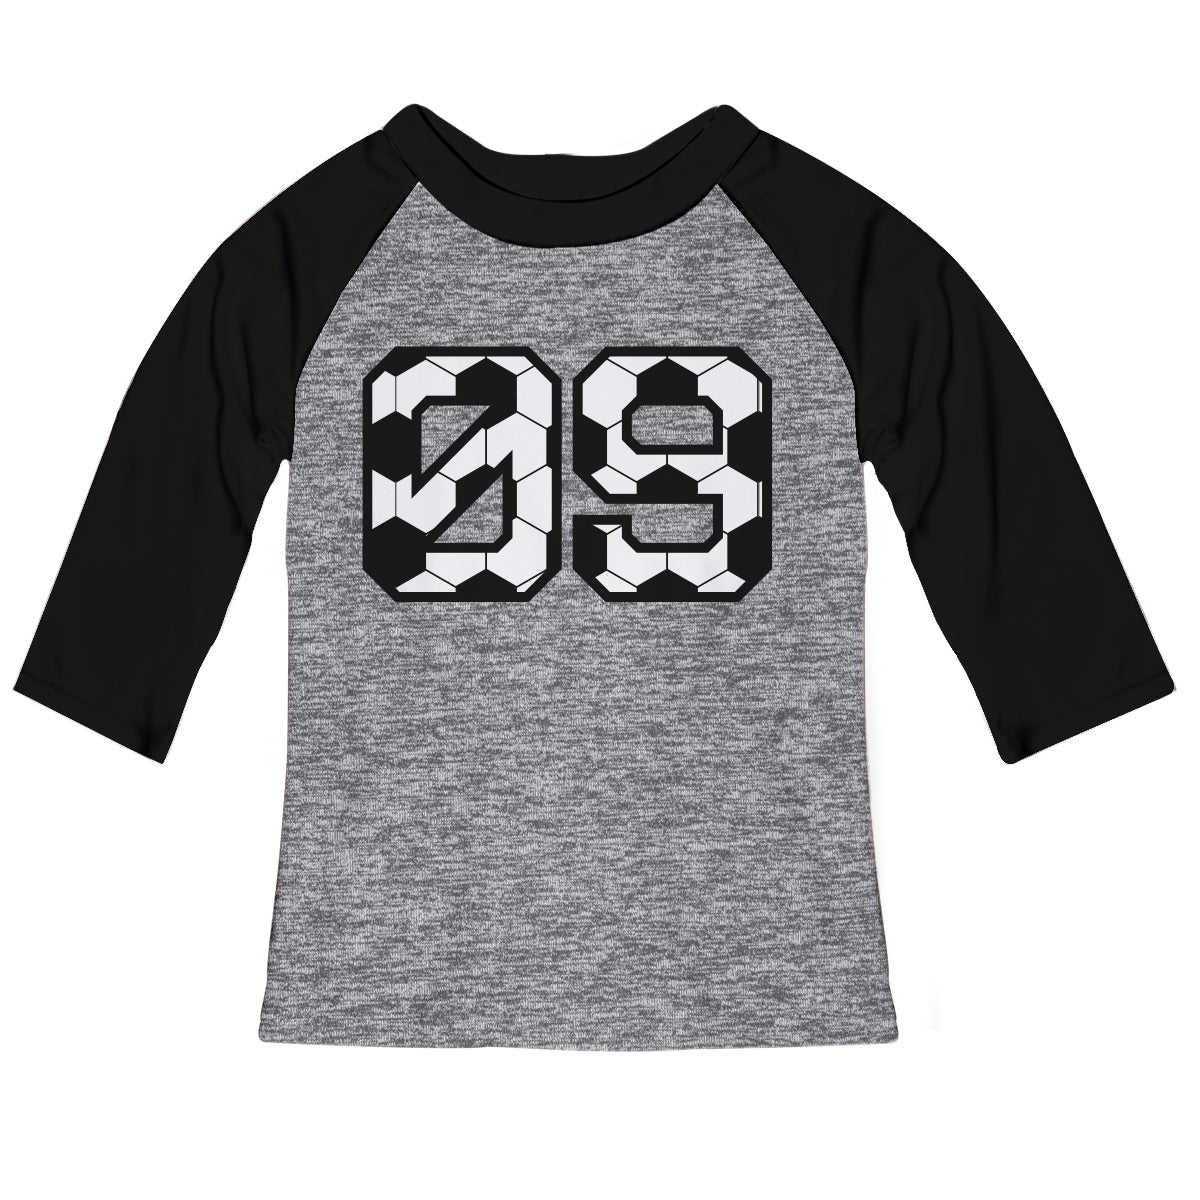 Soccer Personalized Number Gray and Black Raglan Tee Shirt 3/4 Sleeve